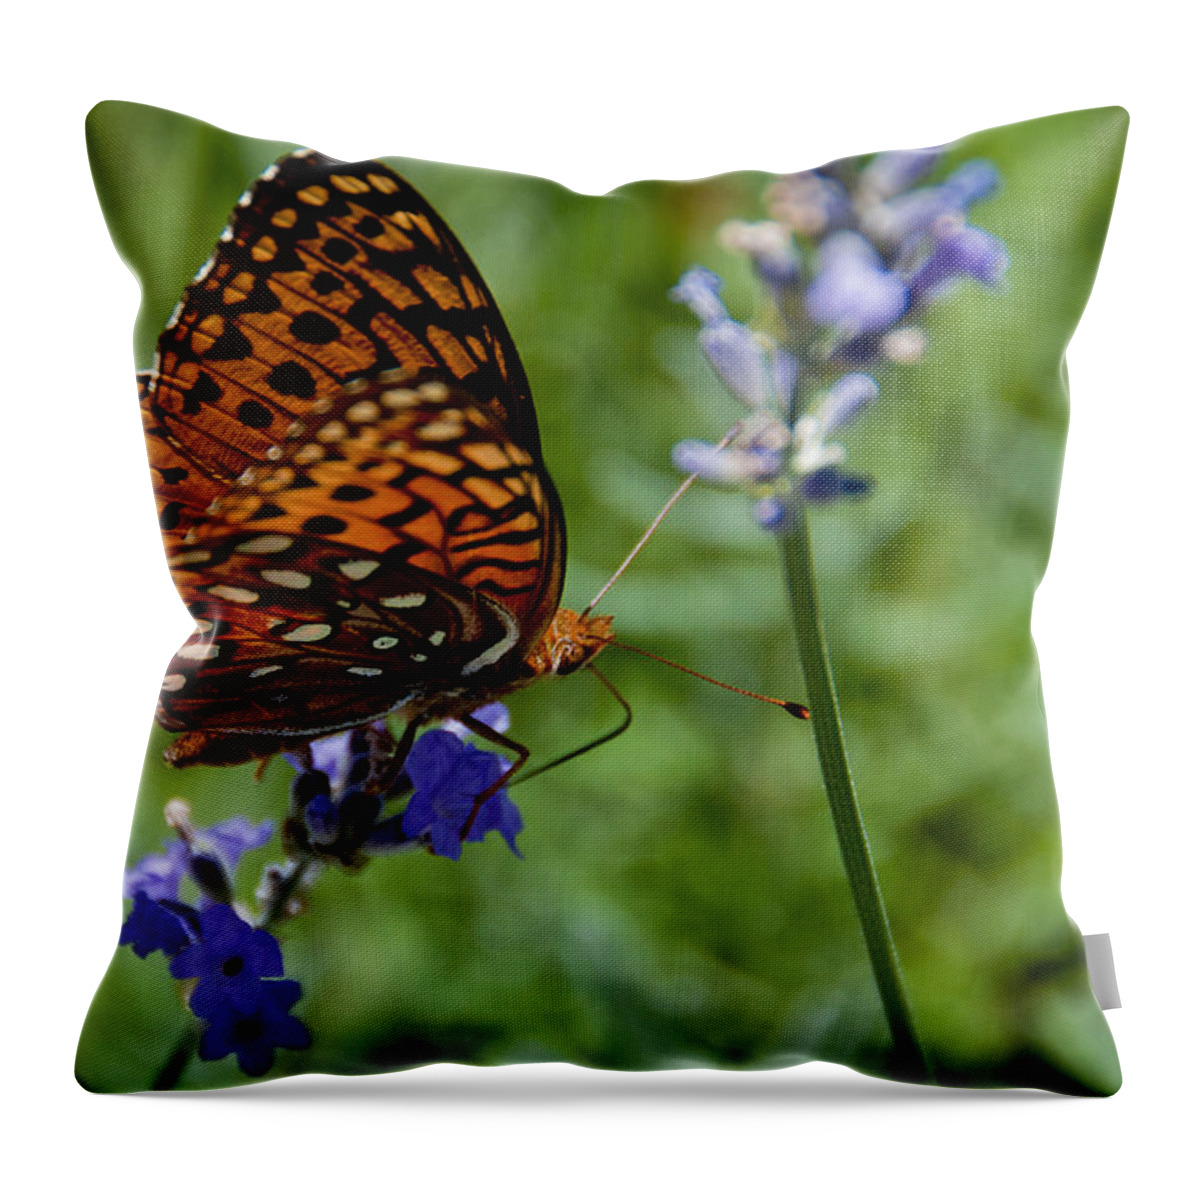 Butterfly Throw Pillow featuring the photograph Butterfly Visit by Ron White